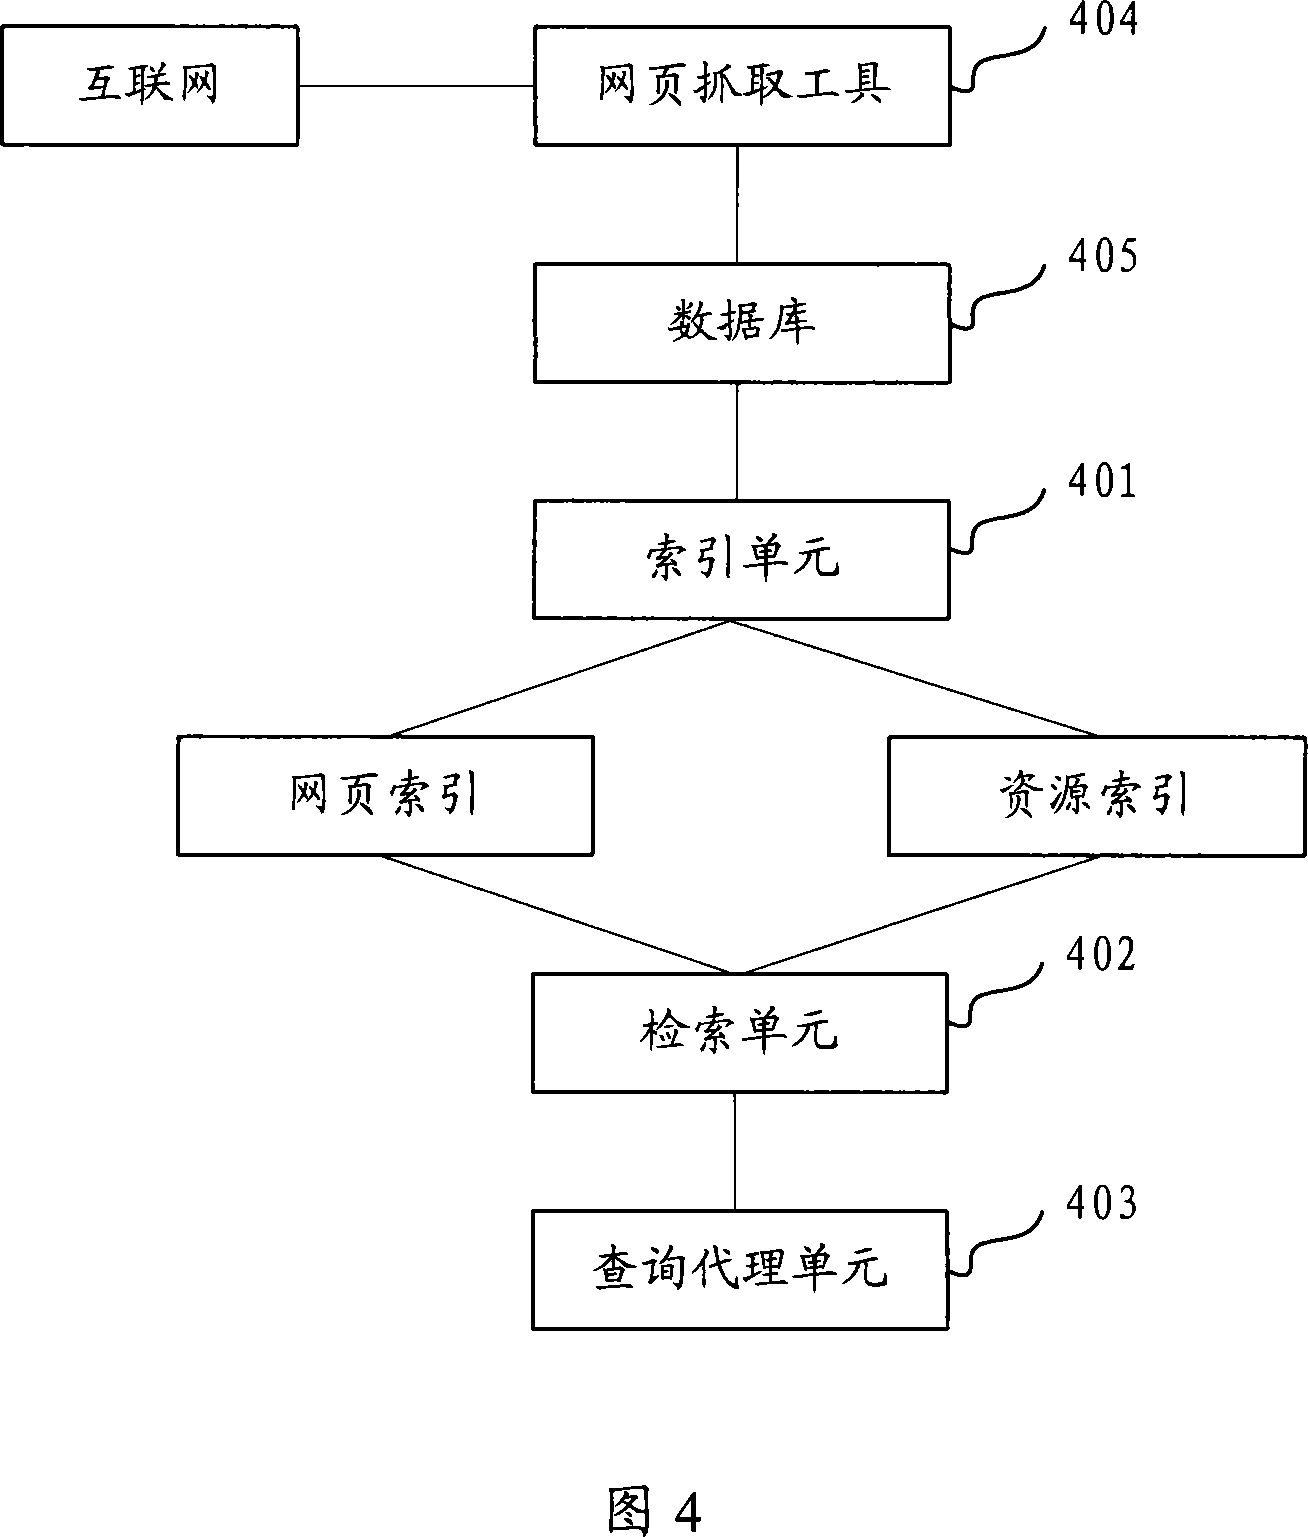 Network resource searching method and system